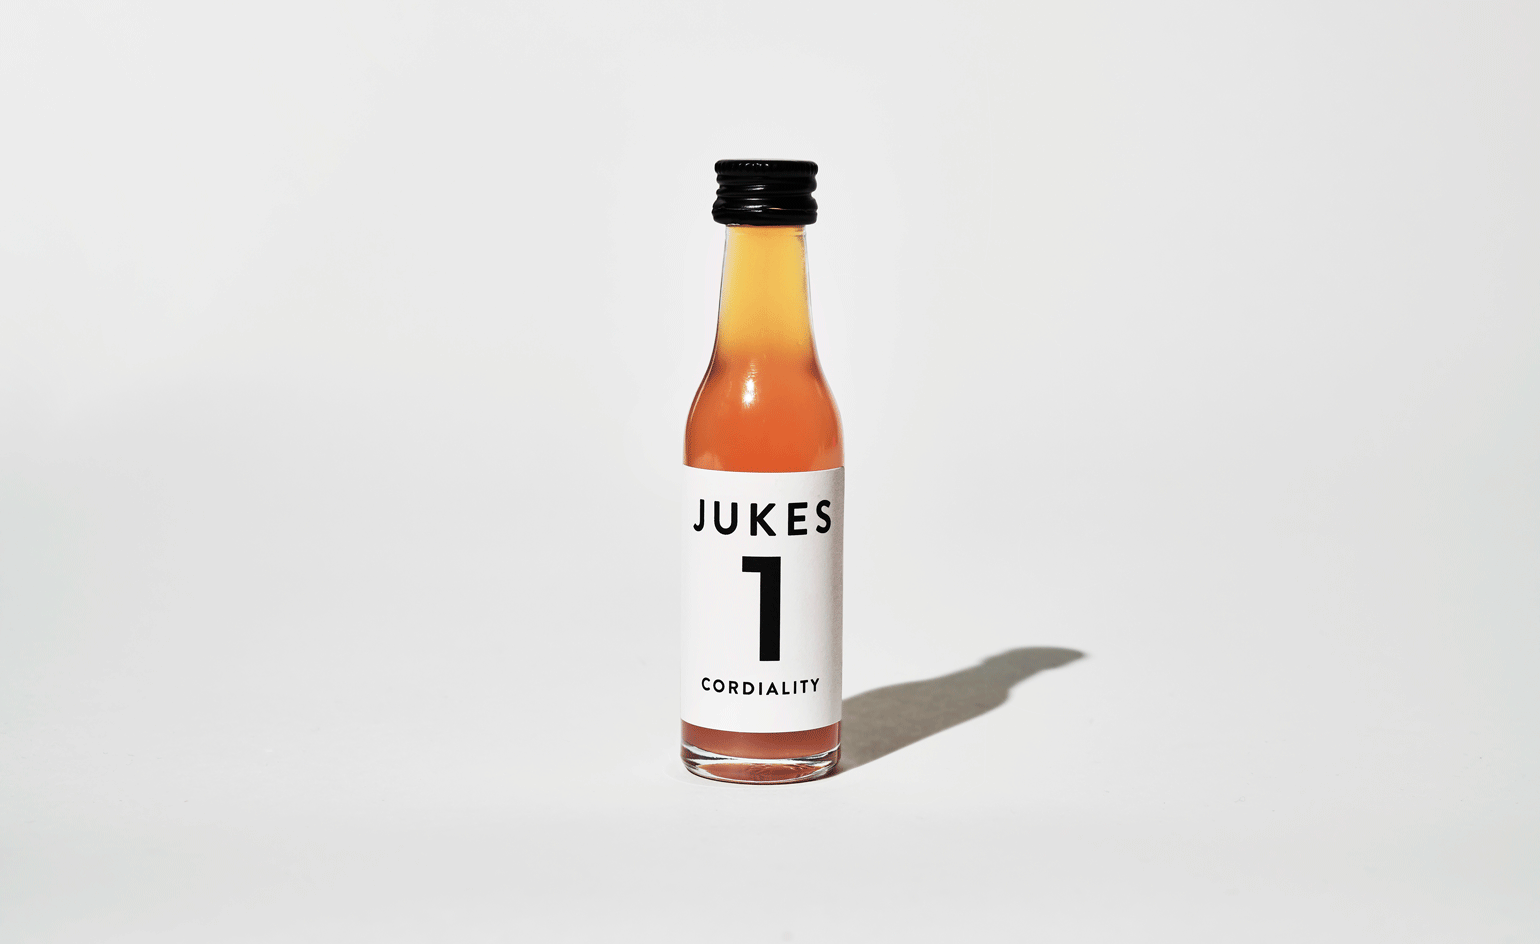 Jukes non-alcoholic cordials in numbered bottles